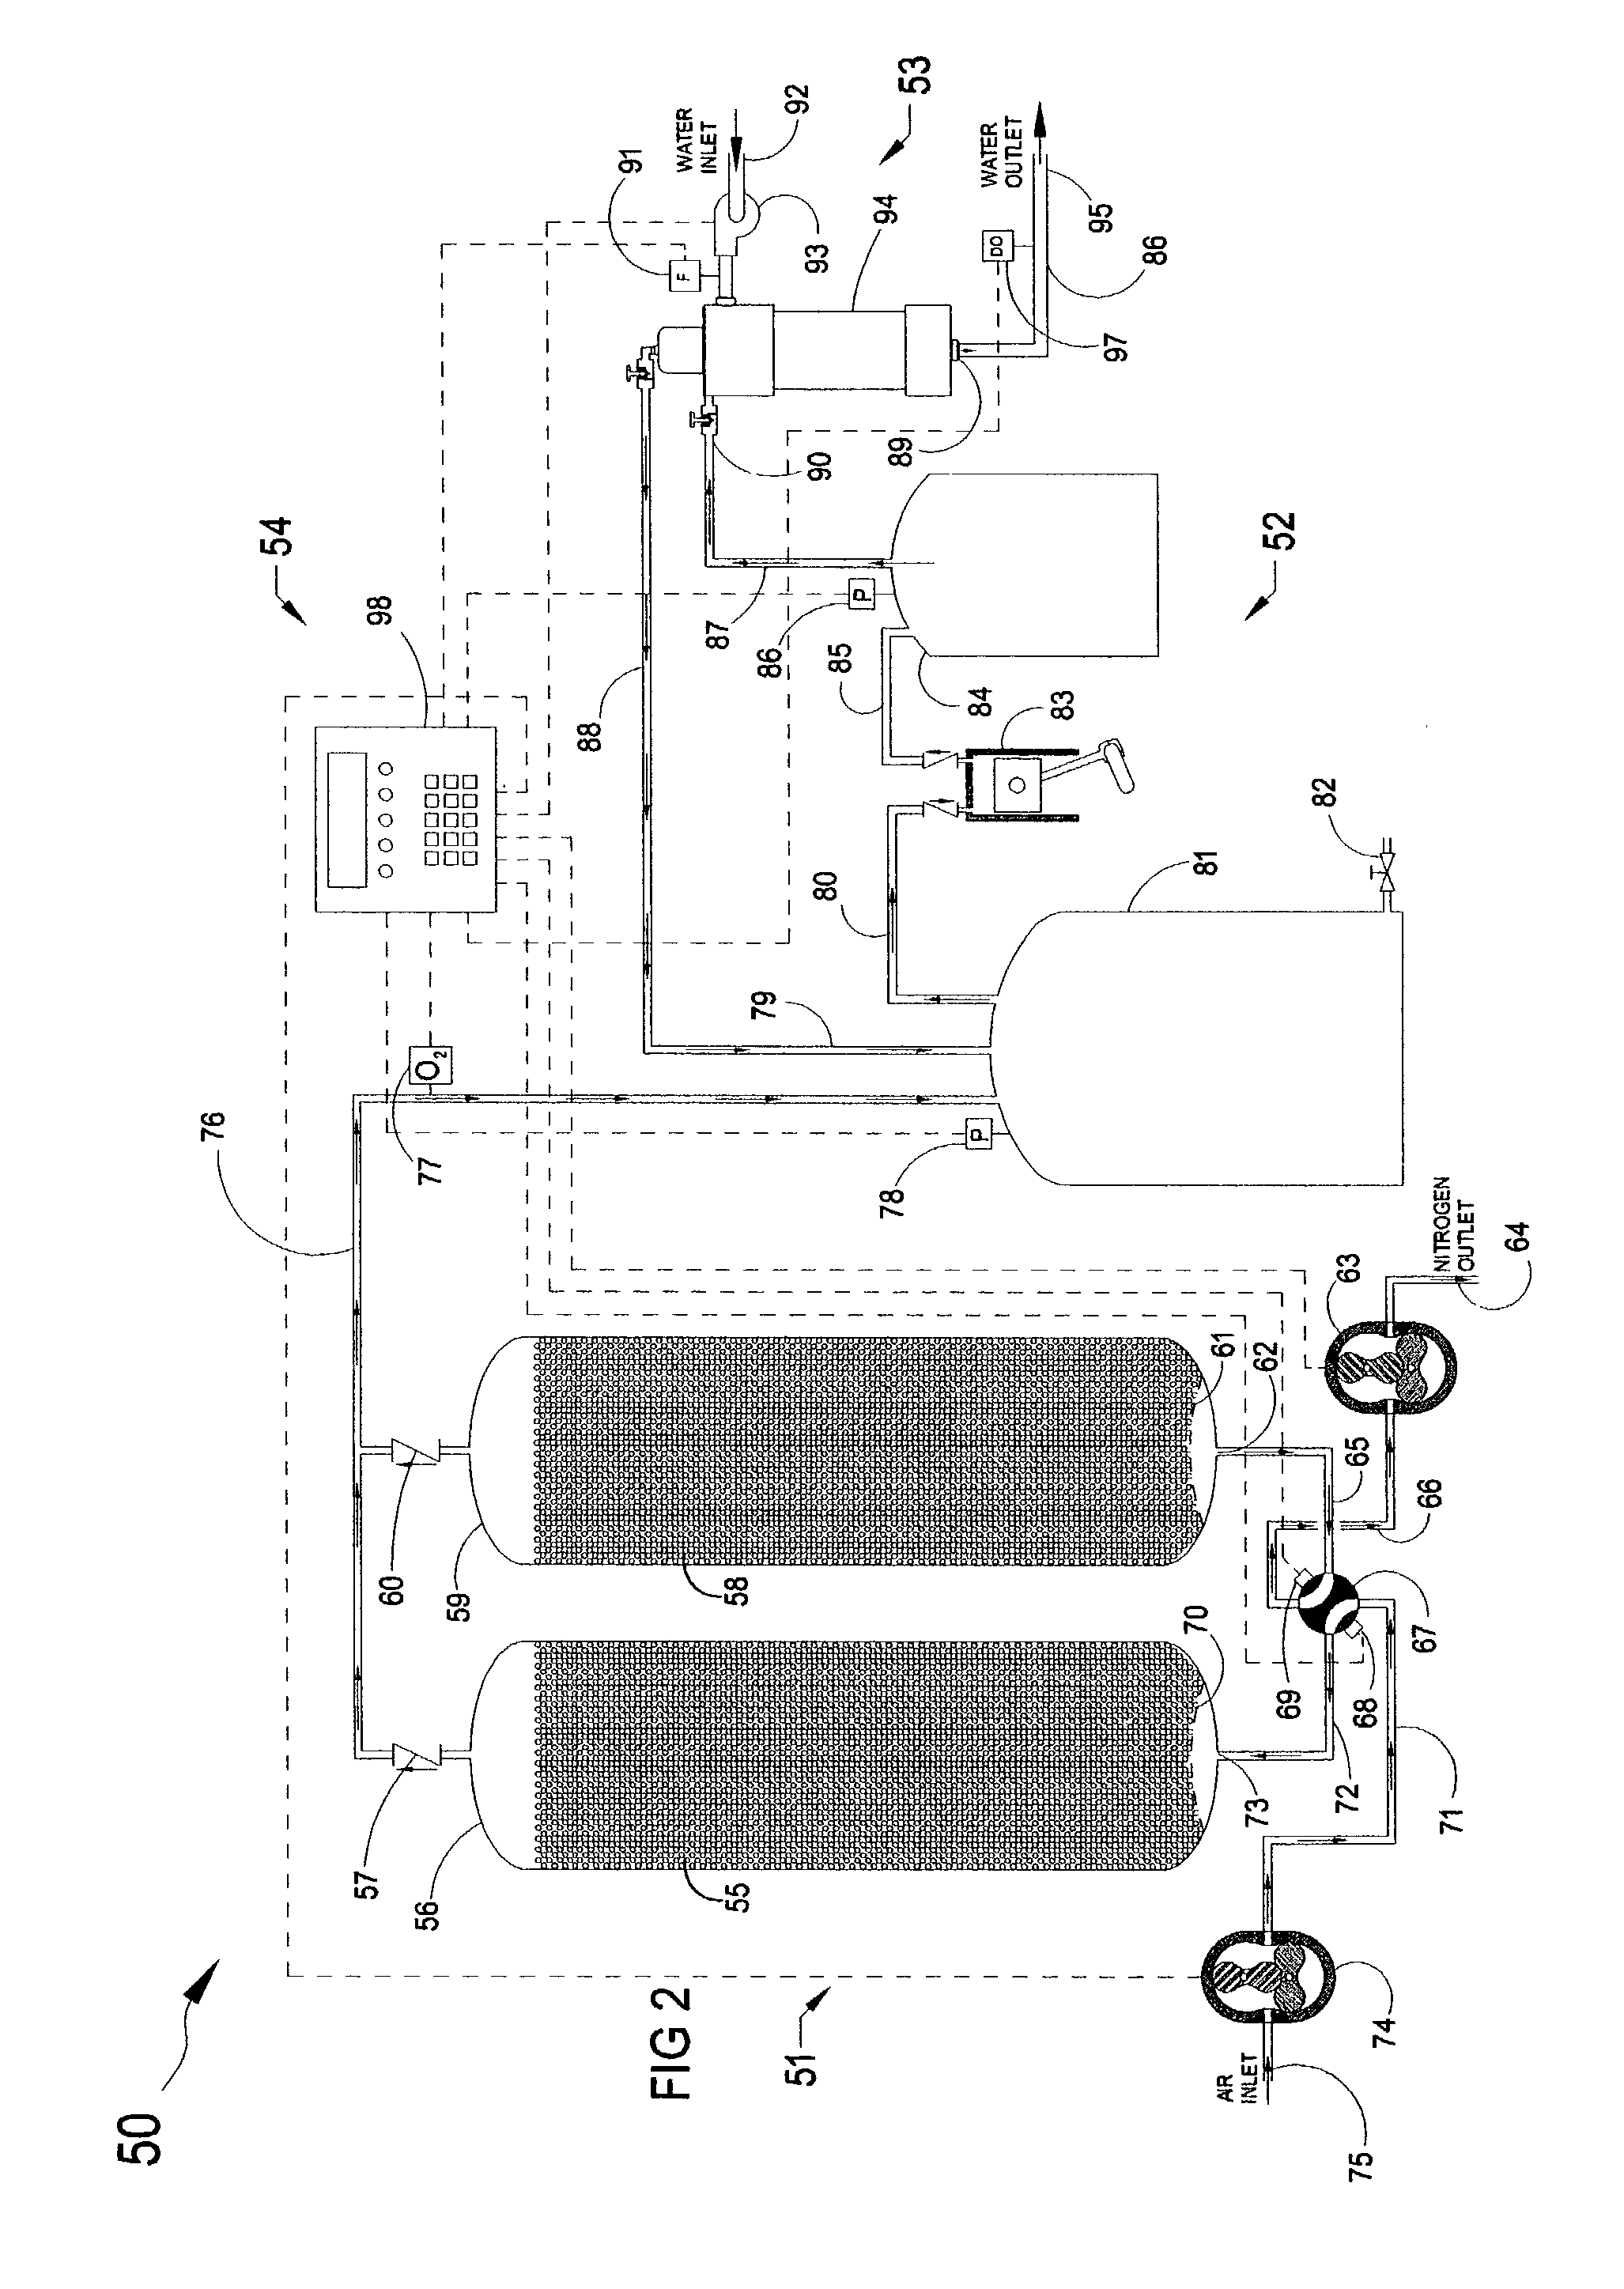 Methods and apparatus for supplying high concentrations of dissolved oxygen and ozone for chemical and biological processes